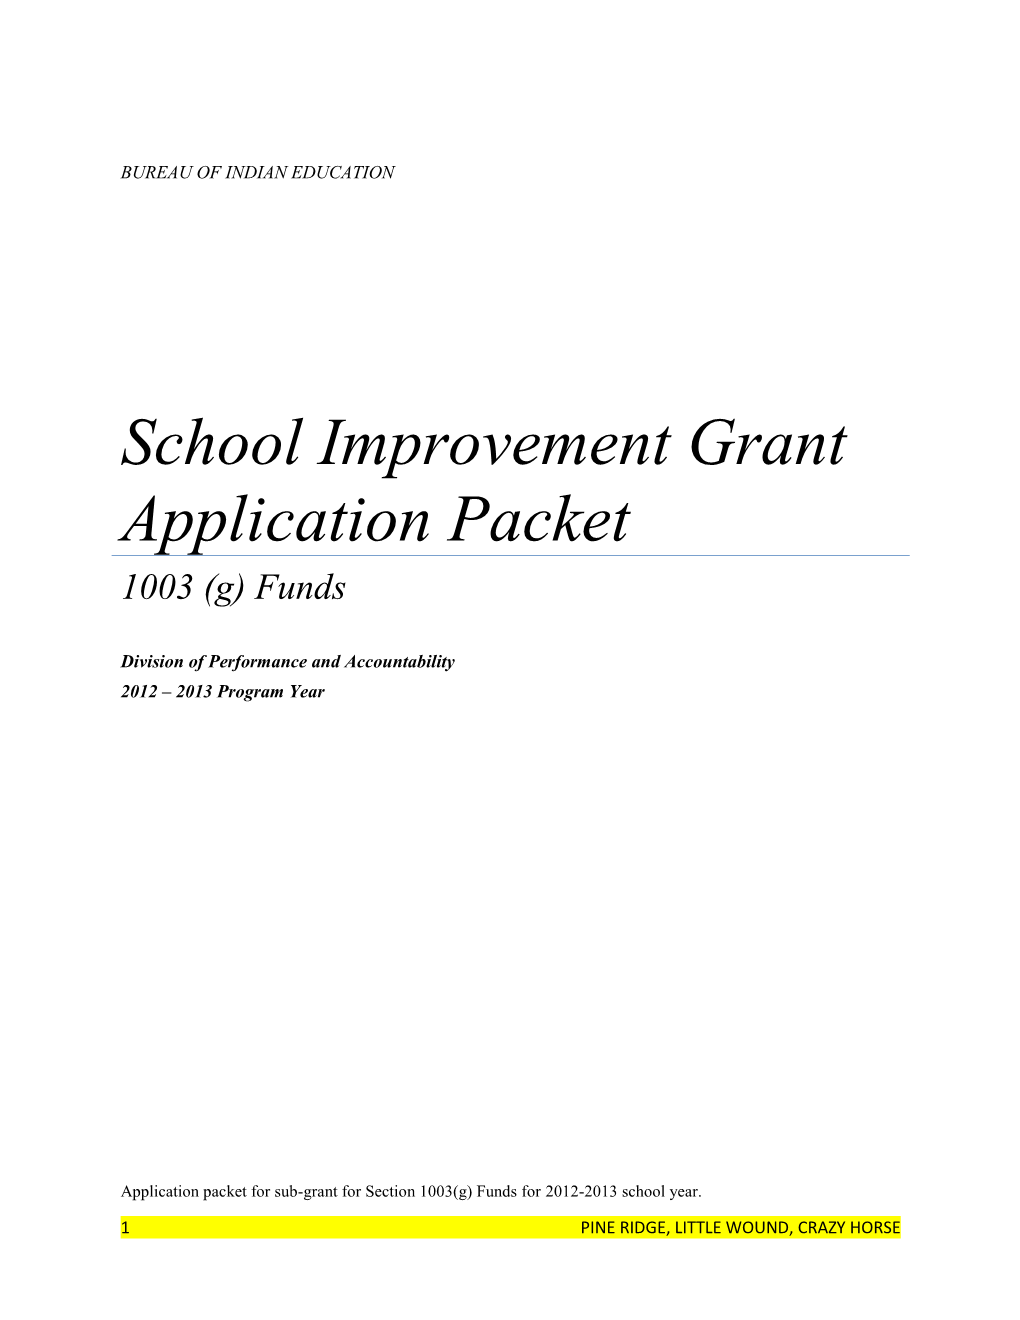 School Improvement Grant Application Packet 1003 (G) Funds